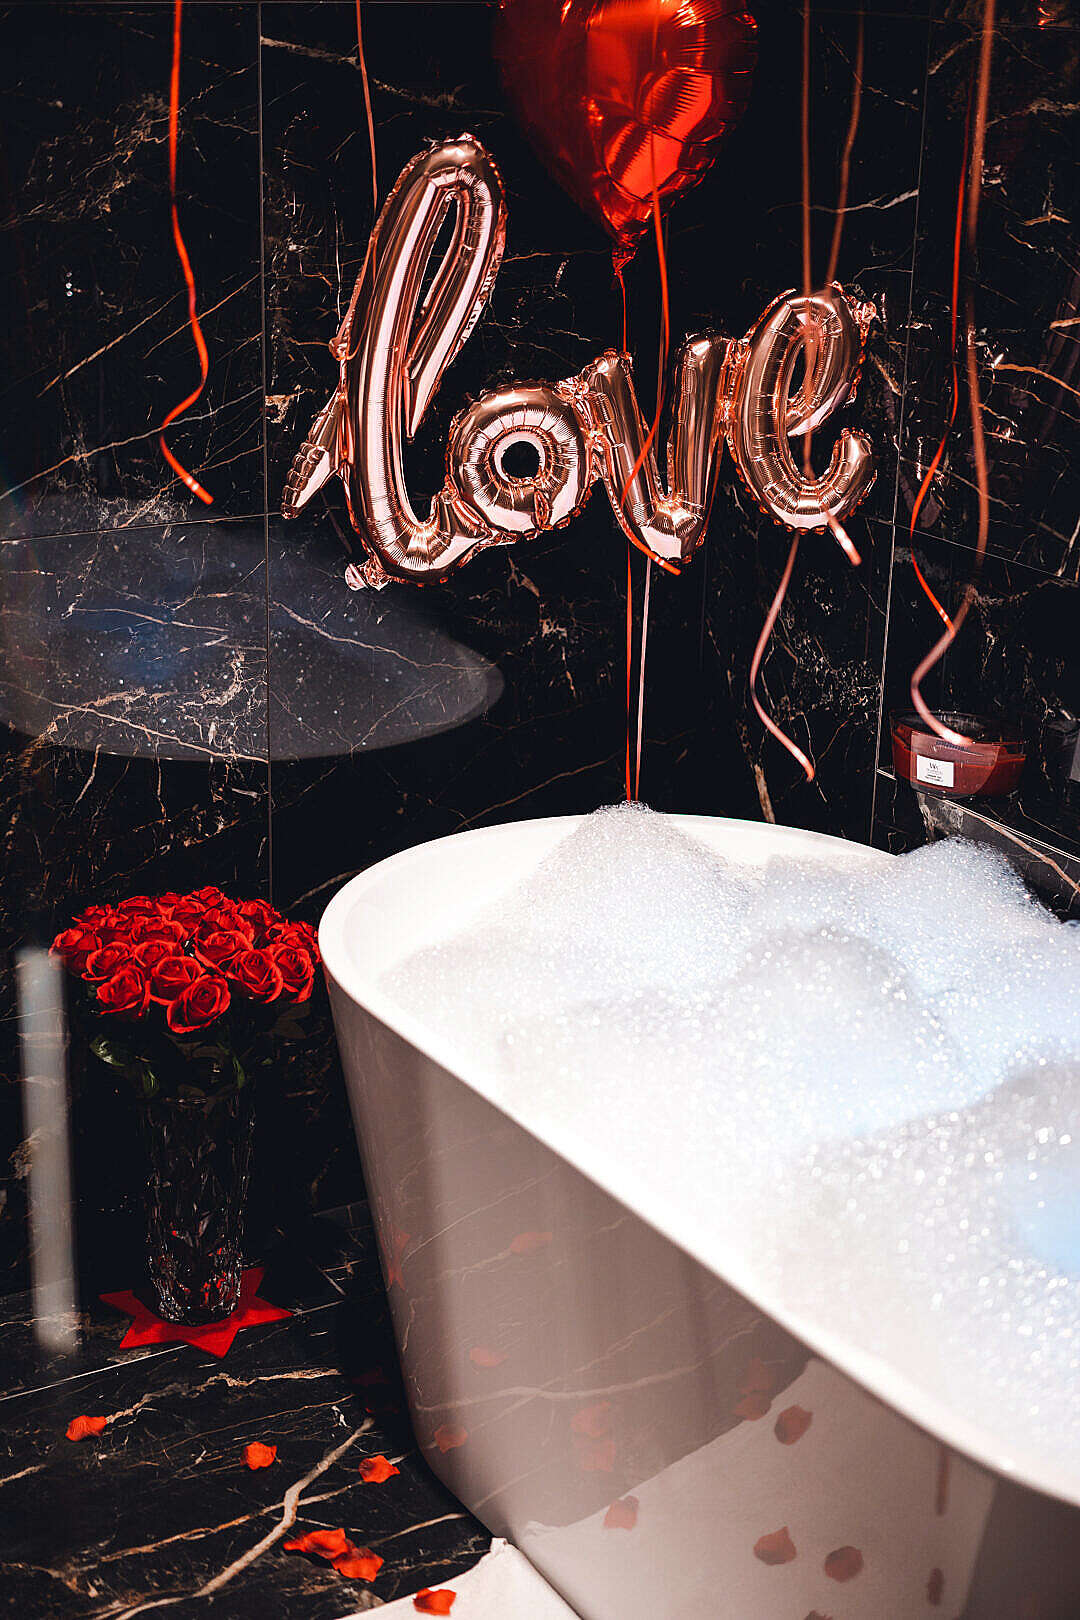 Download Bathtub Full of Foam in Luxury Bathroom with Roses and Love Balloon FREE Stock Photo